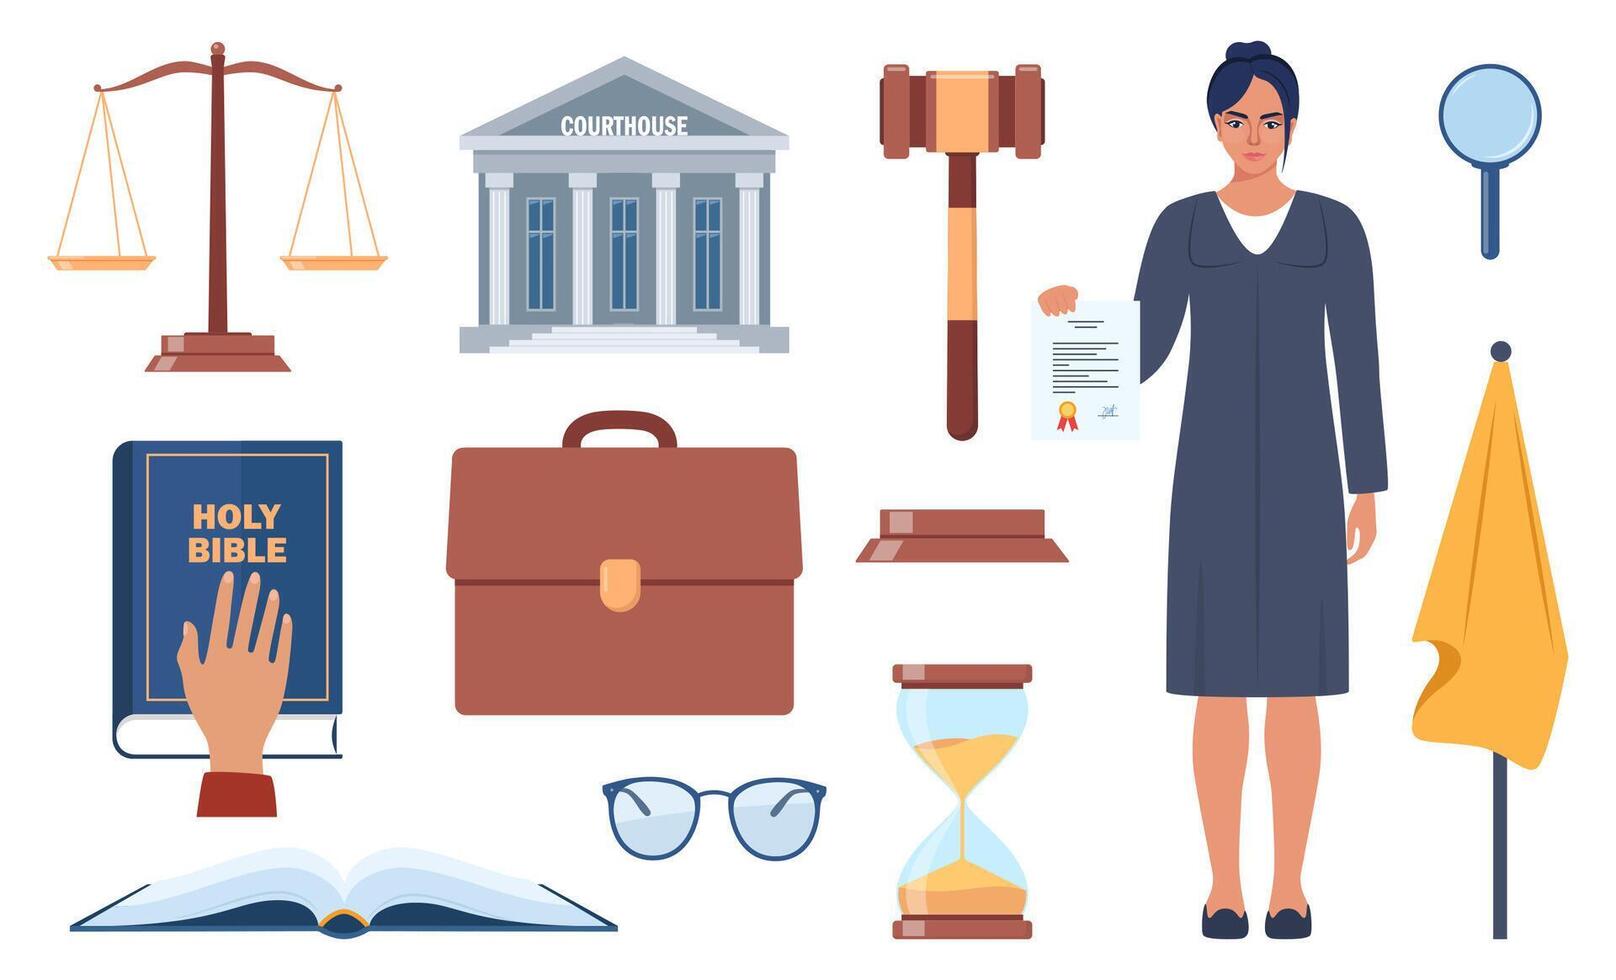 Symbols of justice. Judge in black robe, law book, judicial gavel, weights of justice, courthouse, briefcase. Vector illustration.